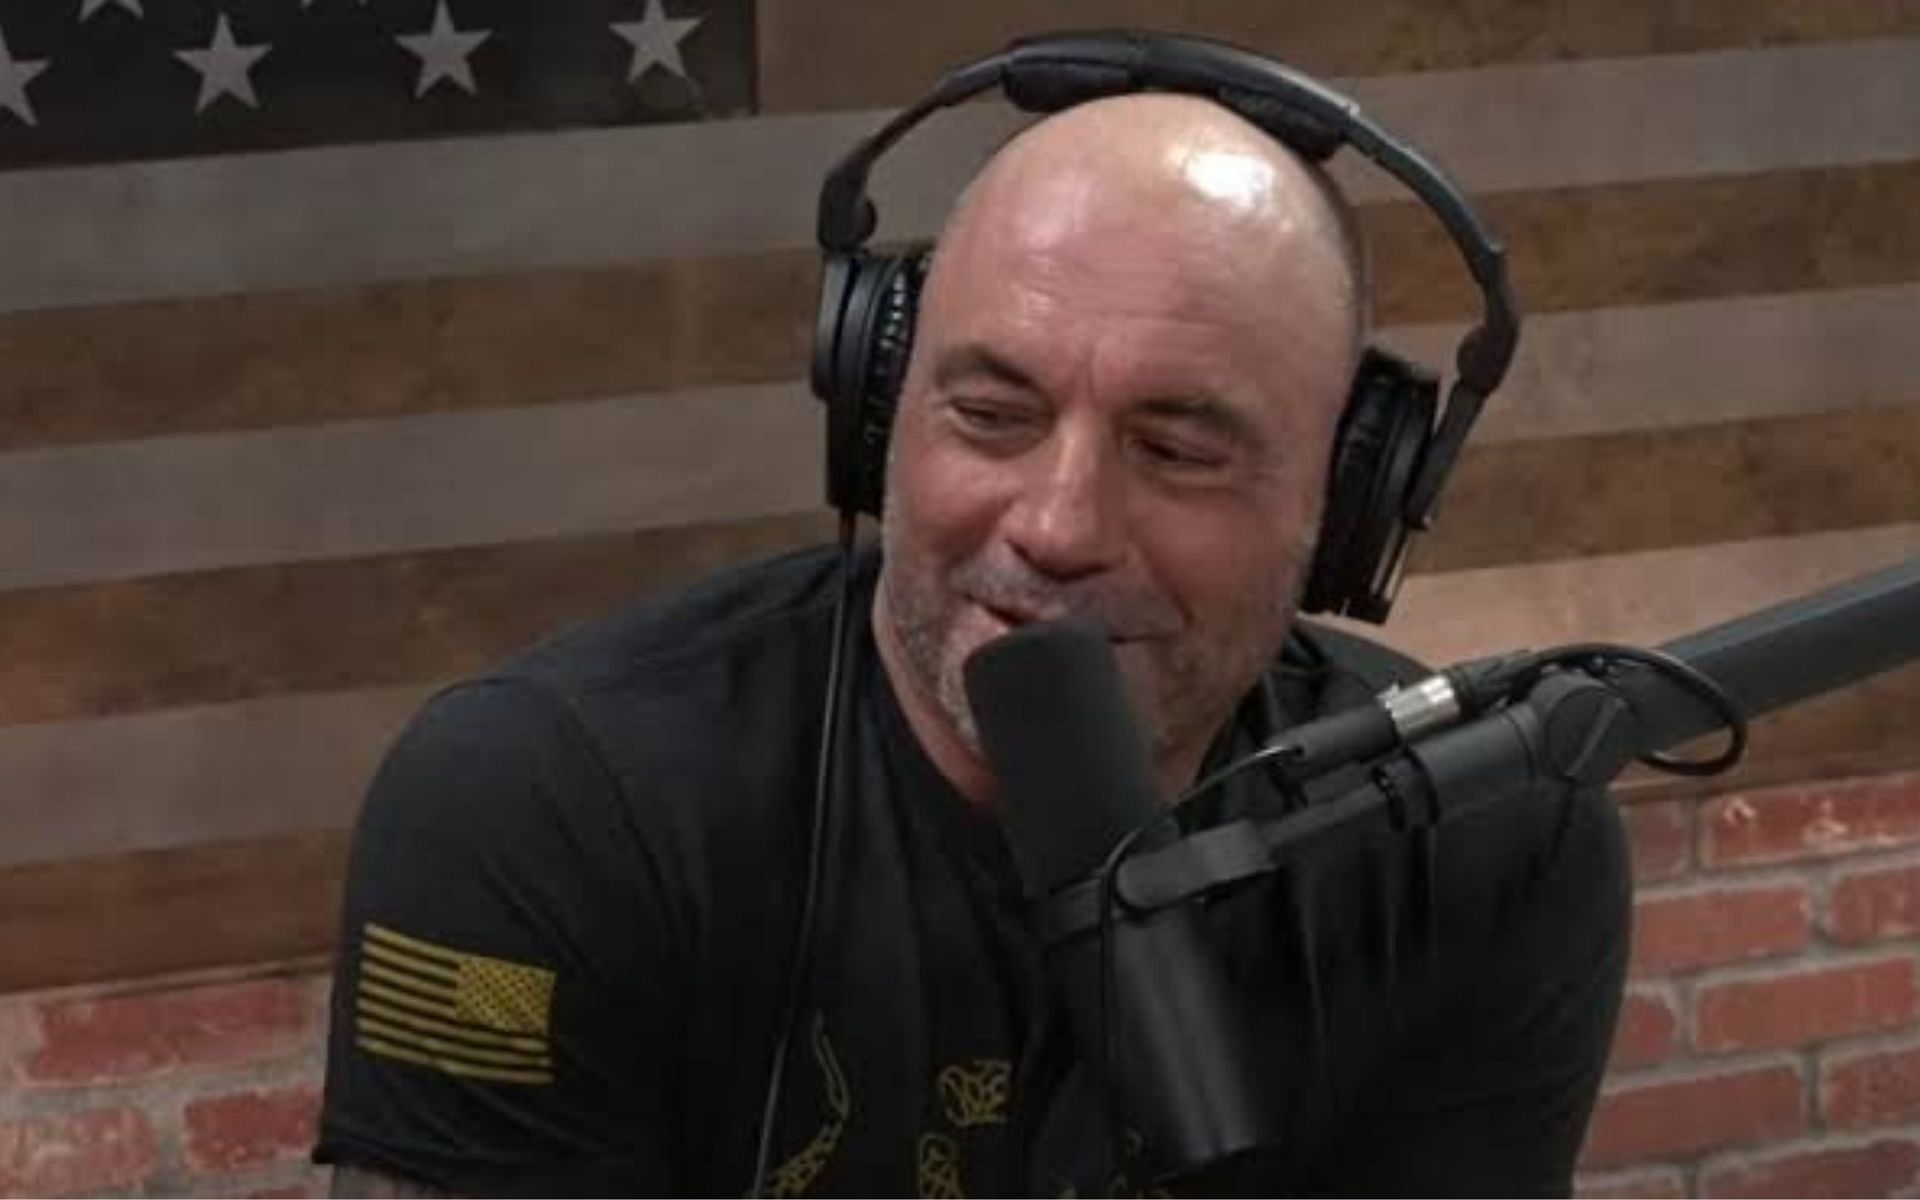 How much does Joe Rogan make per episode of his JRE podcast?